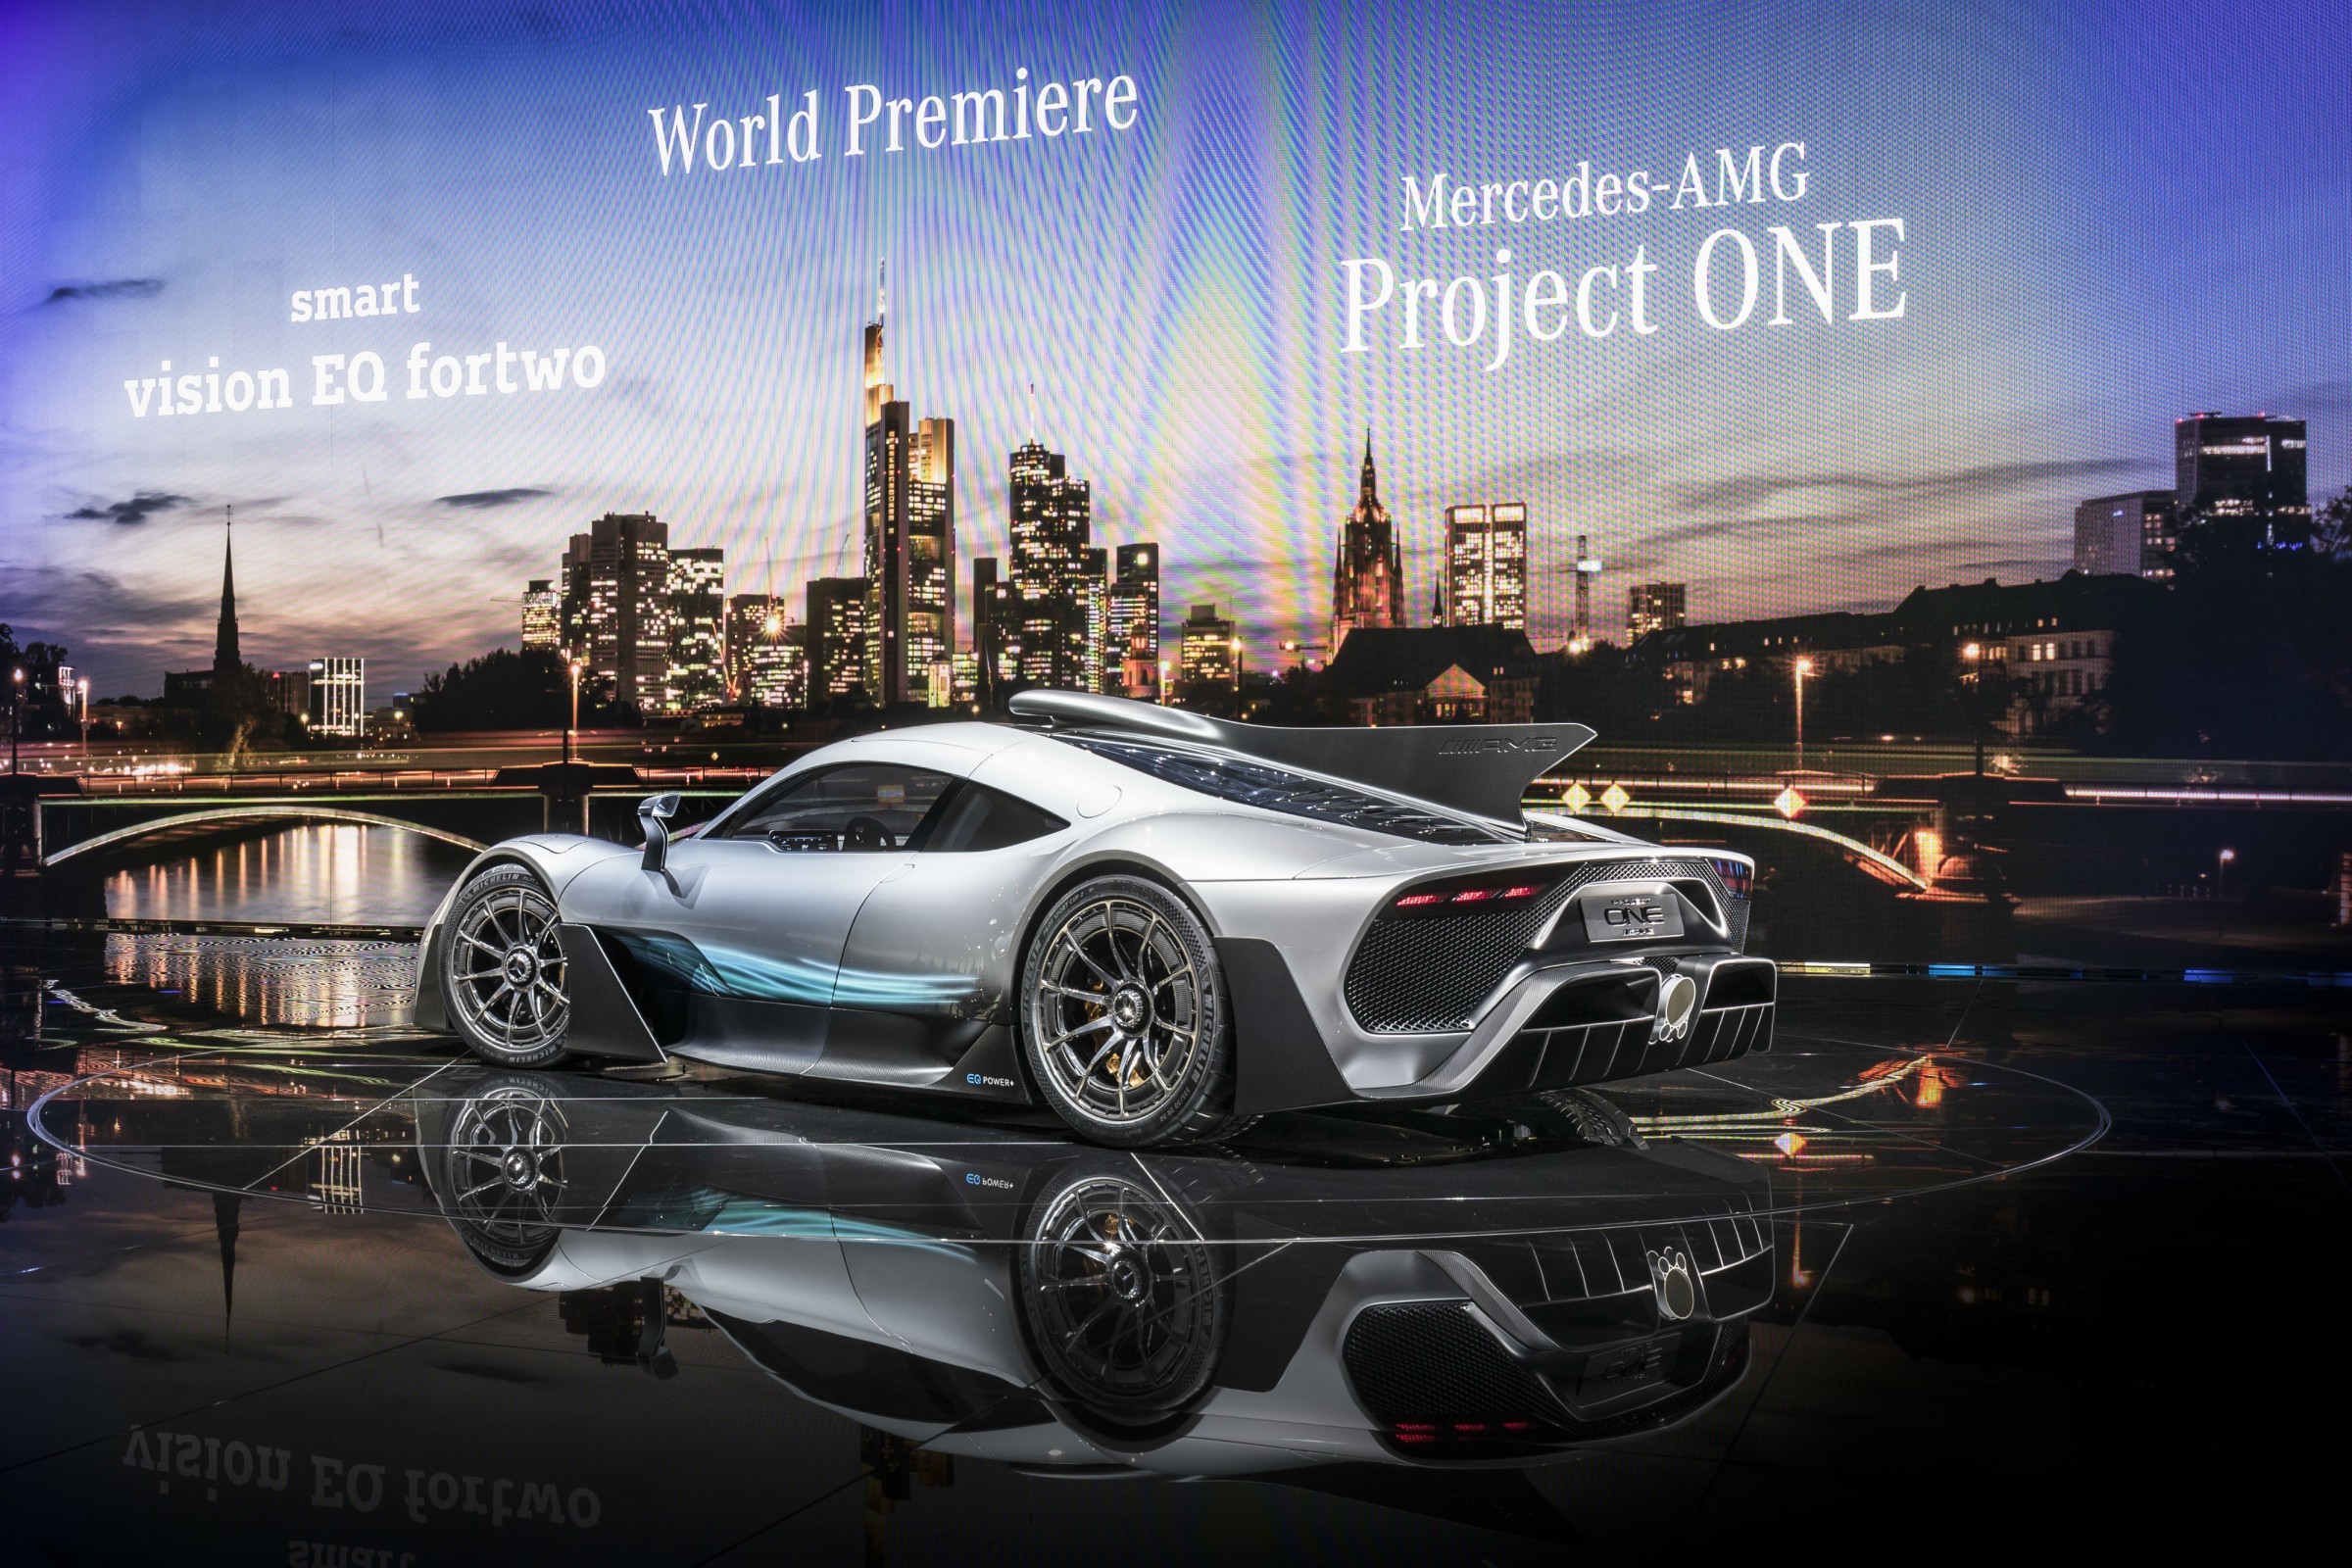  Mercedes-AMG Project ONE    